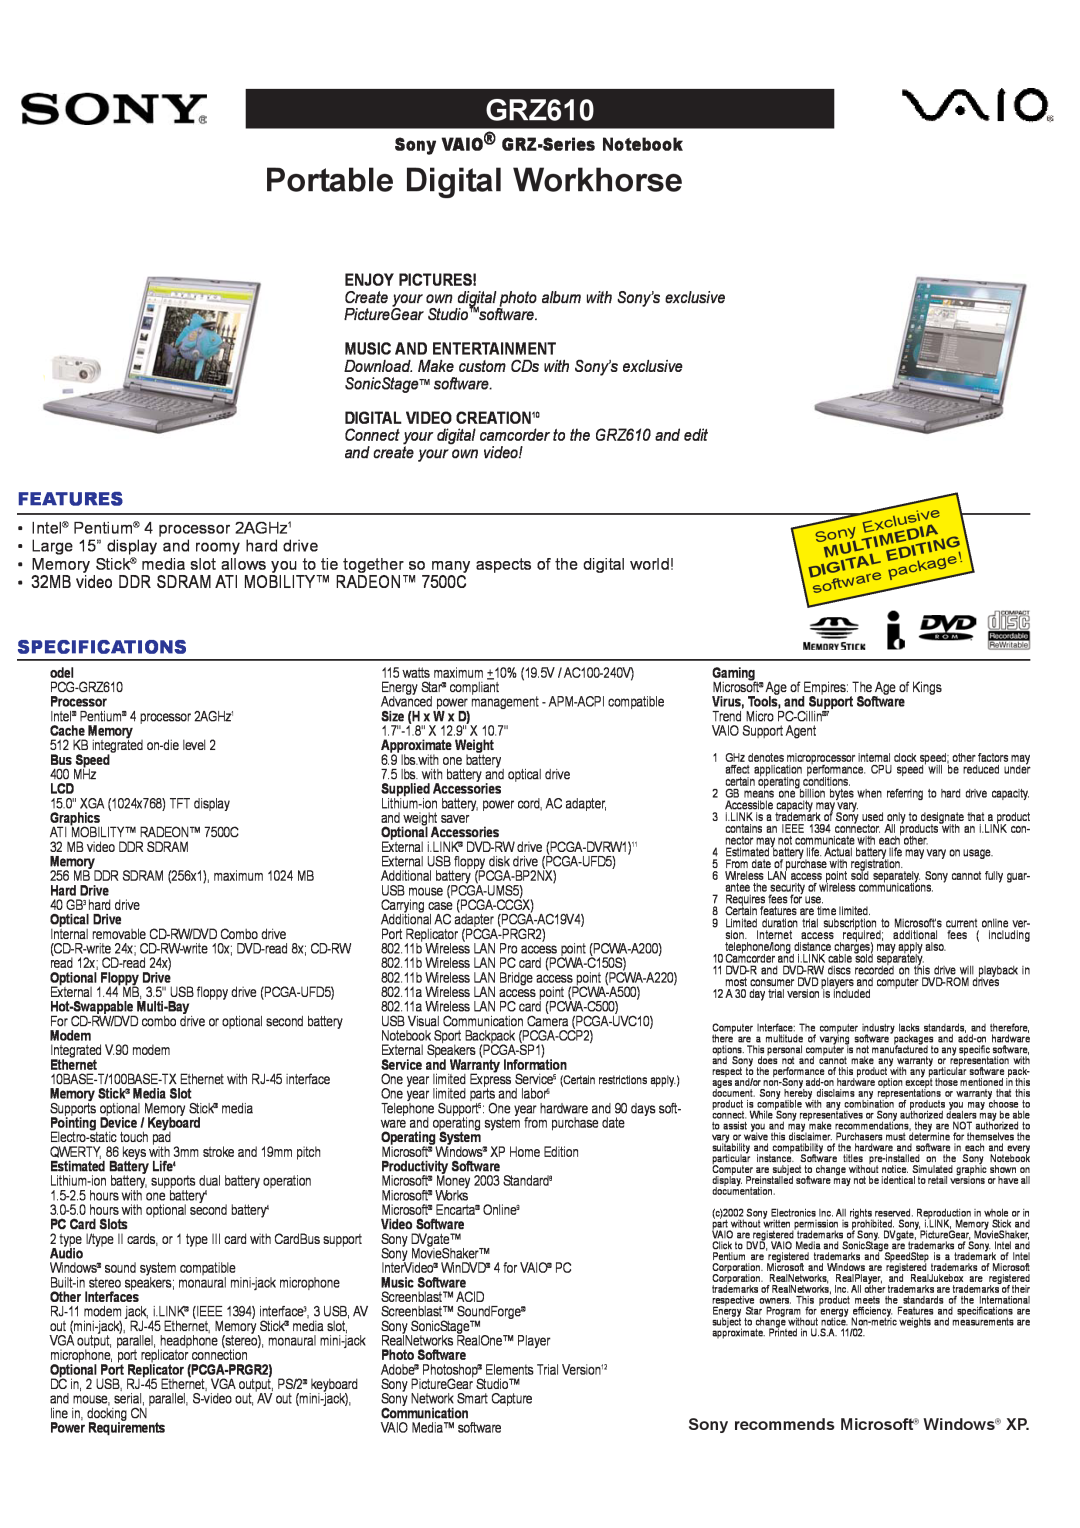 Sony PCG-GRZ610 specifications Portable Digital Workhorse, Sony VAIO GRZ-Series Notebook, Features, Specifications 